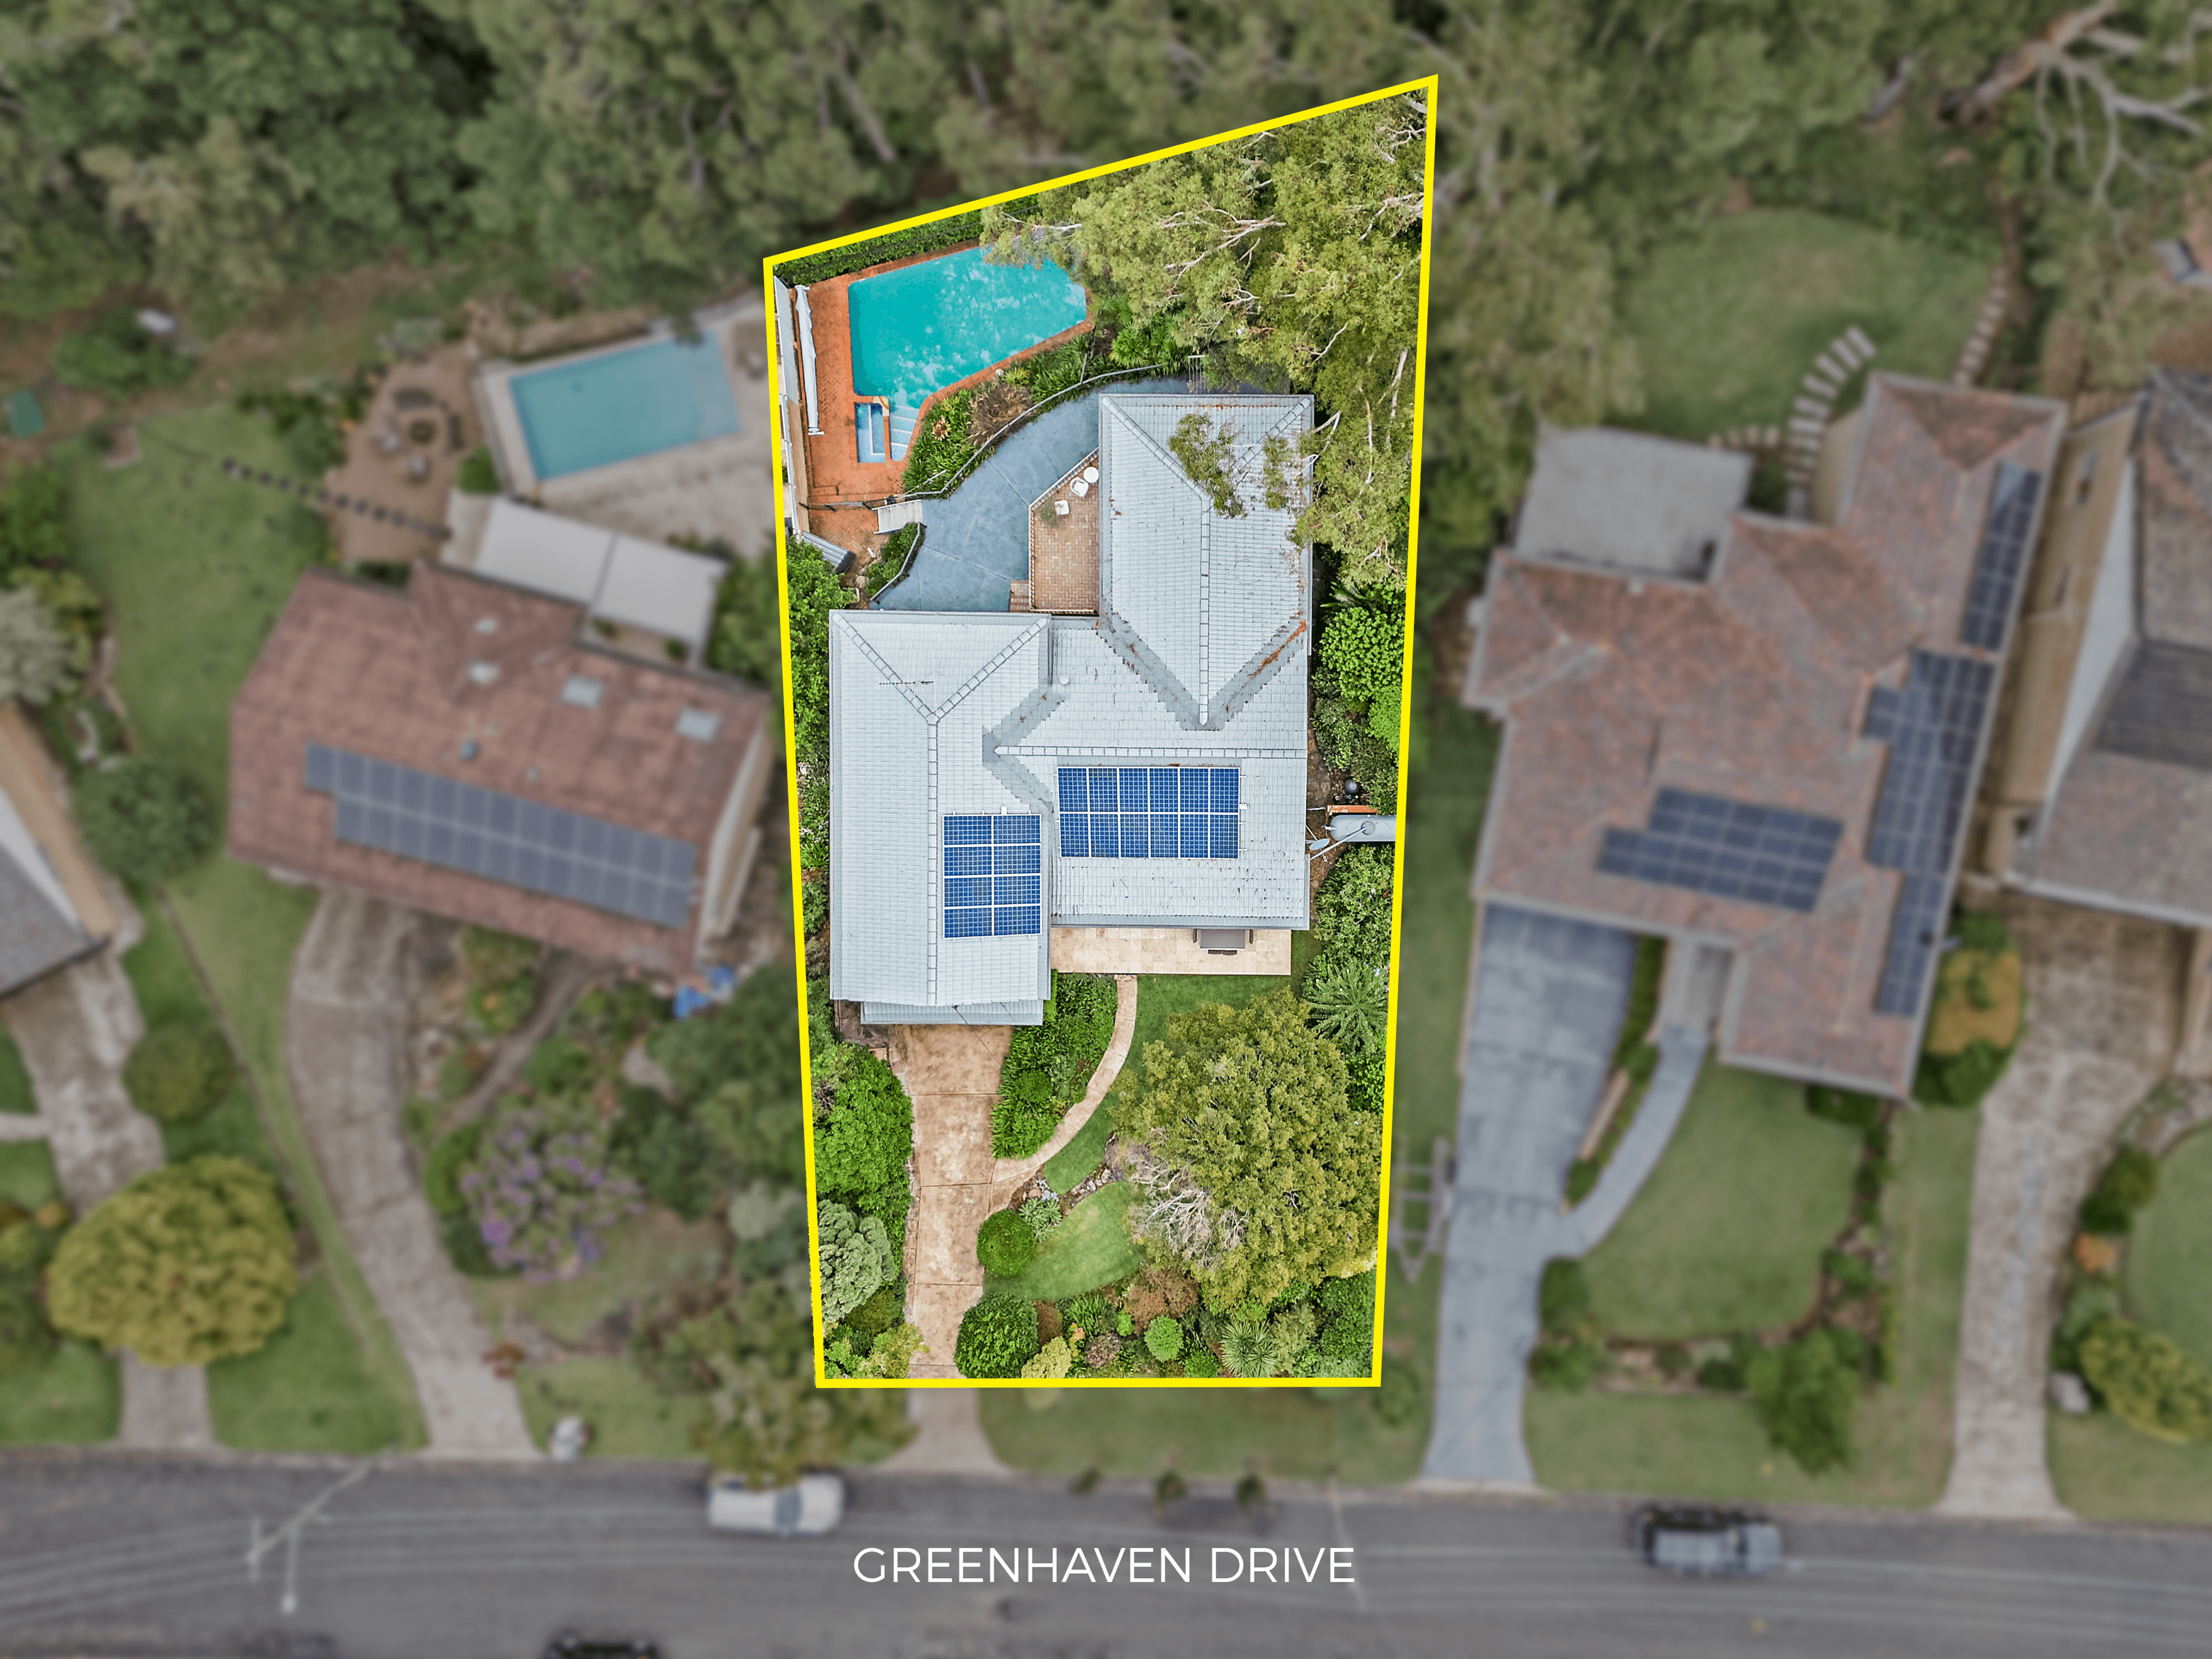 46 Greenhaven Drive, PENNANT HILLS, NSW 2120